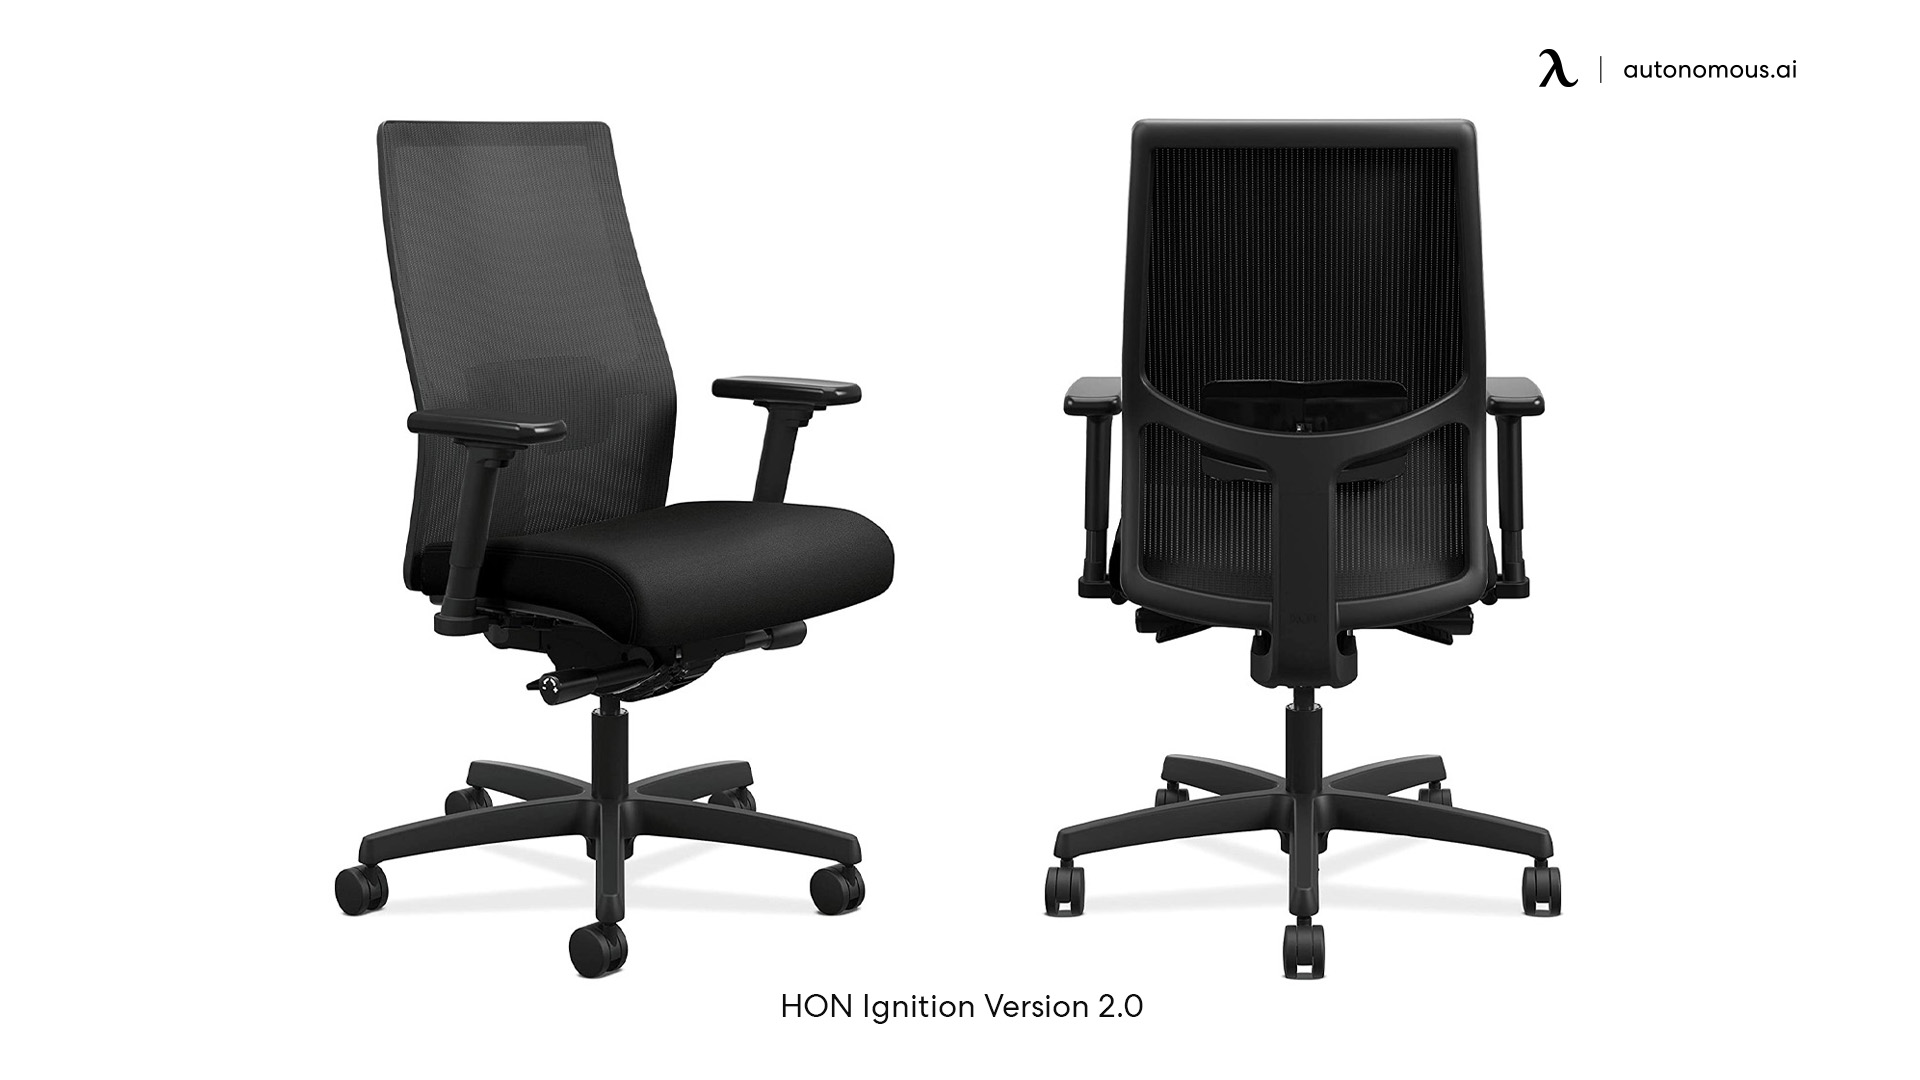 Hon Ignition 2.0 fancy office chair